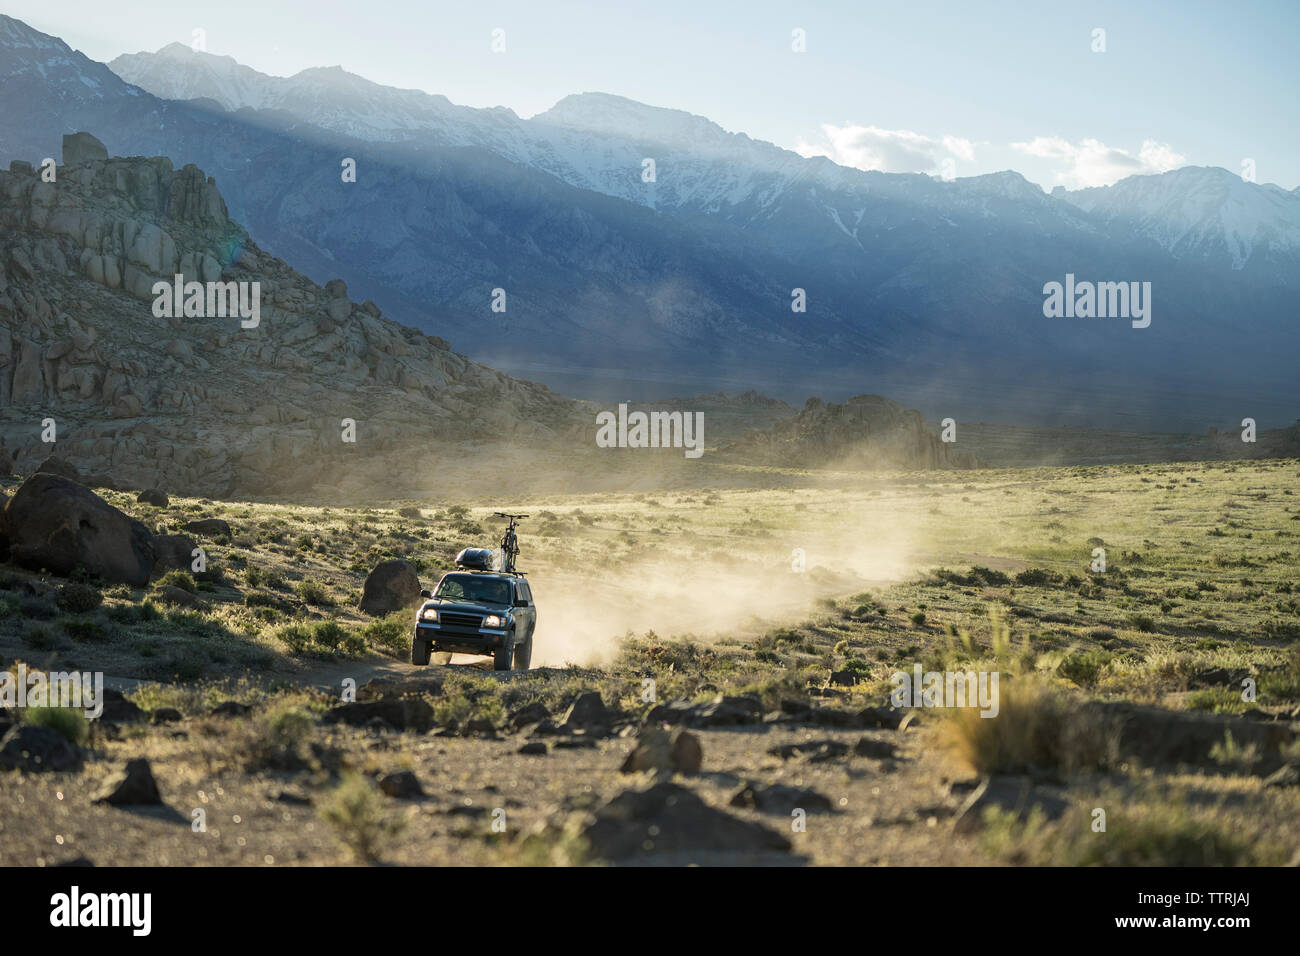 Sports utility vehicle on field against Alabama hills Stock Photo